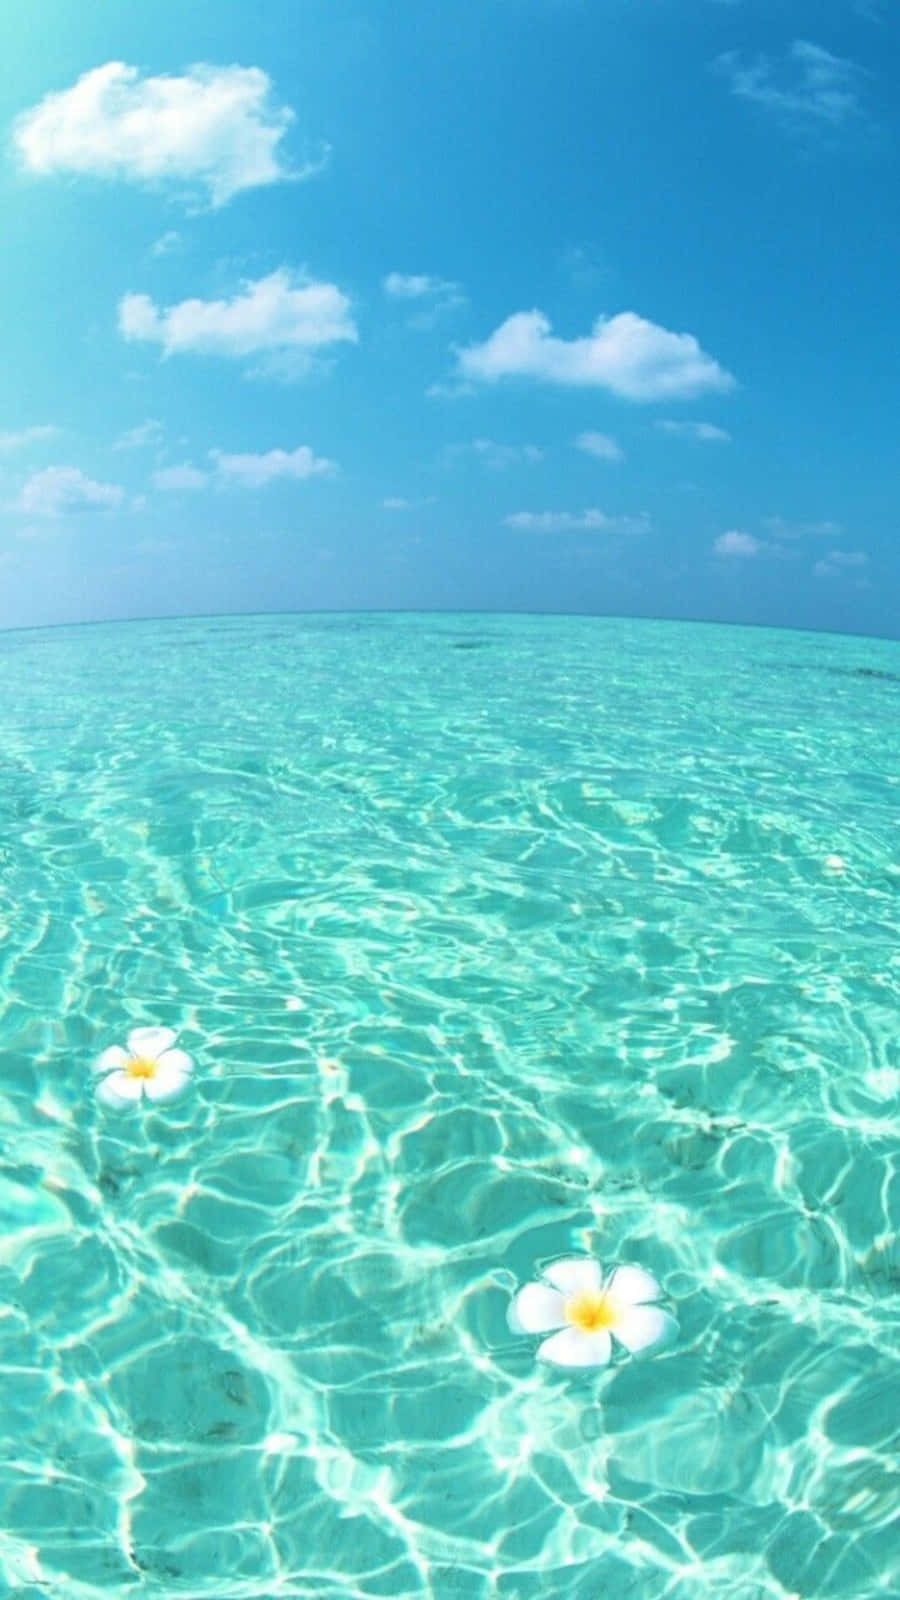 A Clear Blue Ocean With White Flowers Floating In The Water